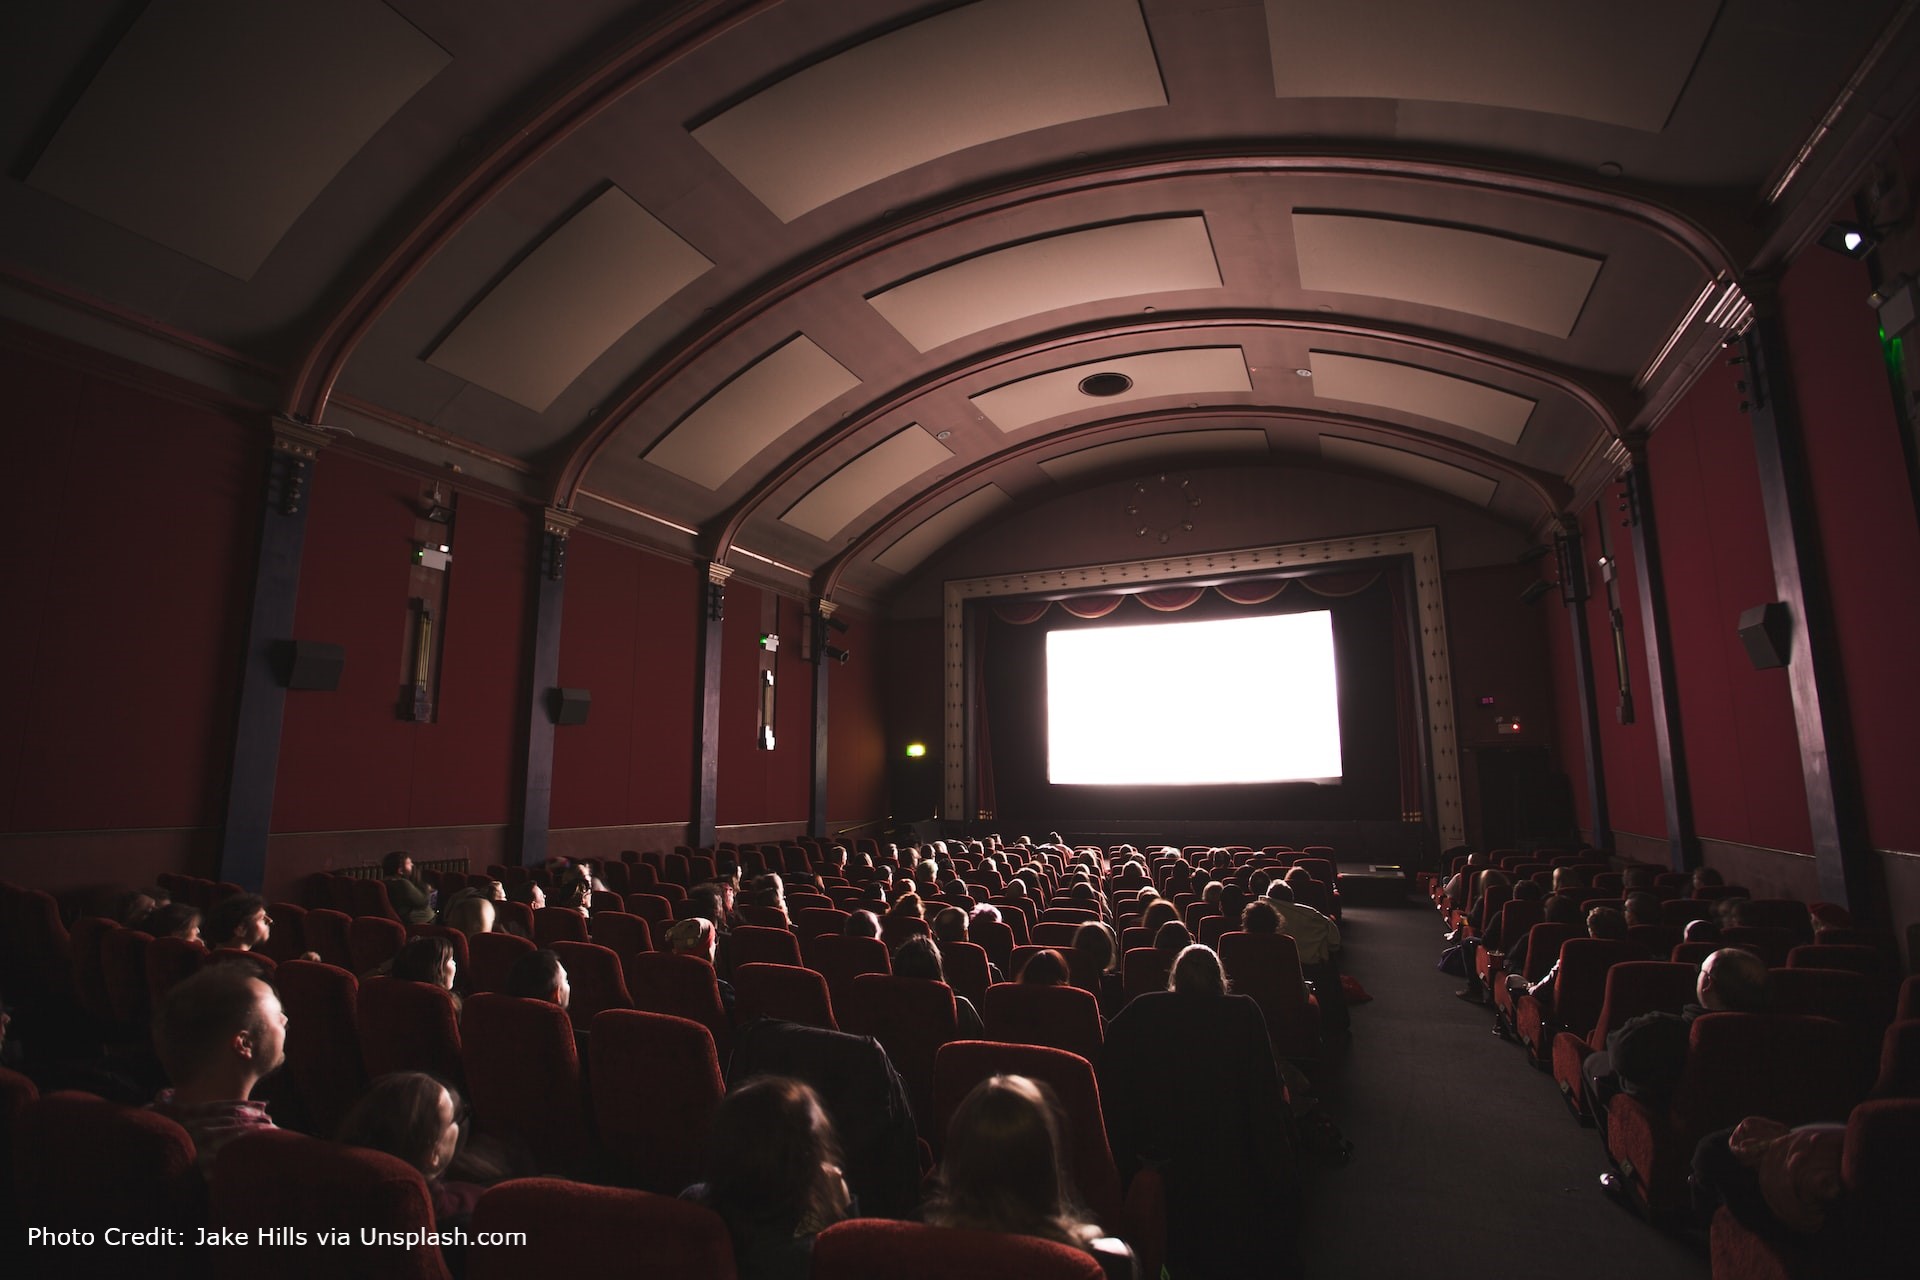 The photo shows the inside of a cinema.